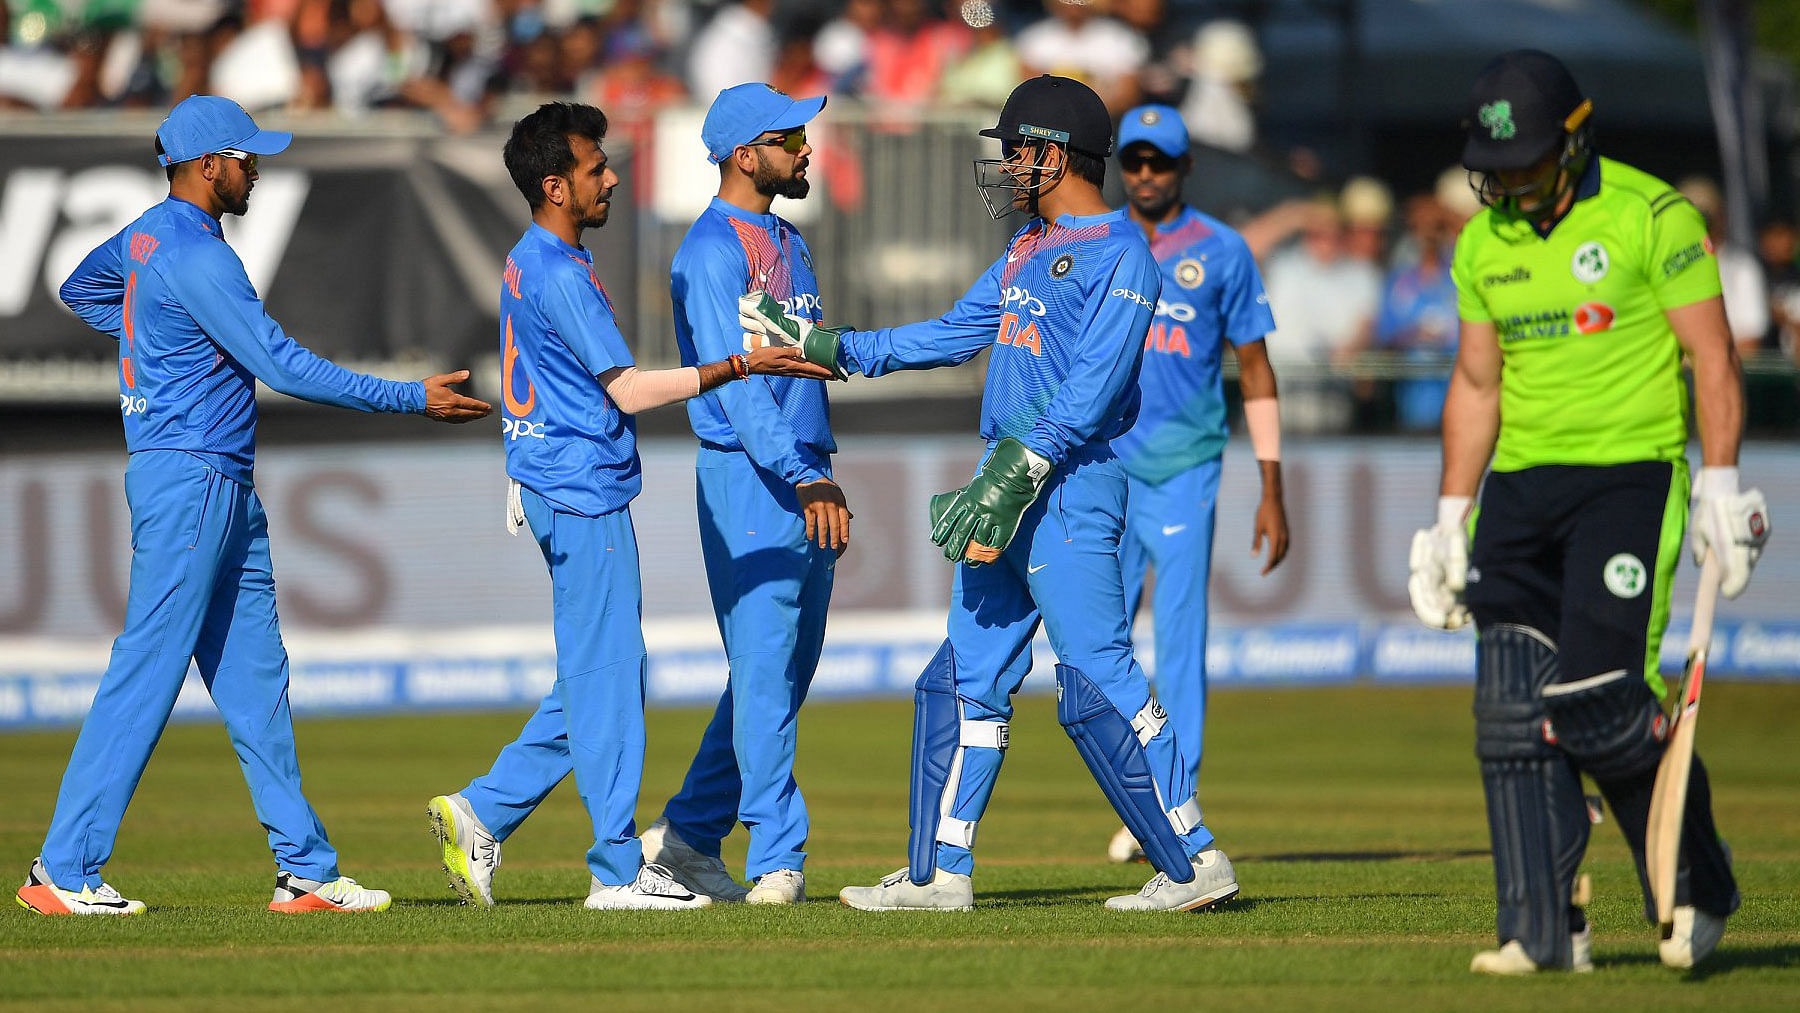 The Indian team celebrated the occasion of its 100th T20 International match with a comprehensive win over Ireland.